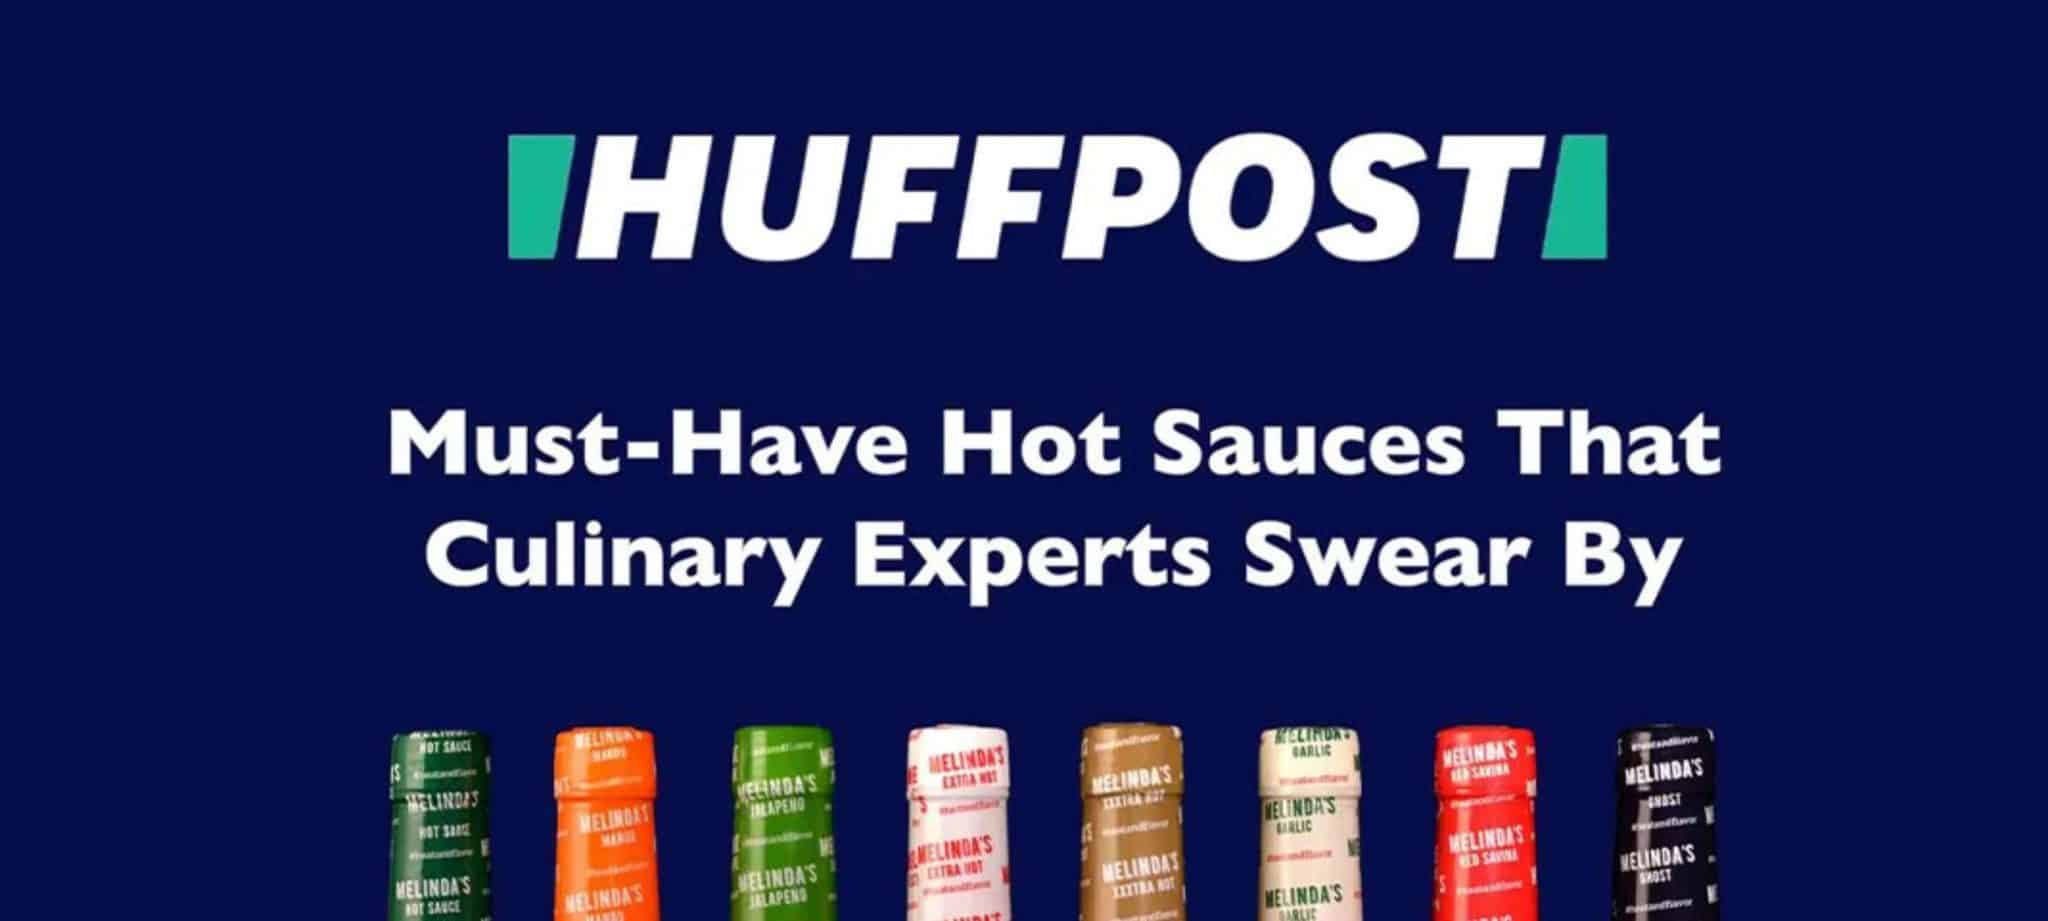 Must-Have Hot Sauces That Culinary Experts Swear By | Huffpost